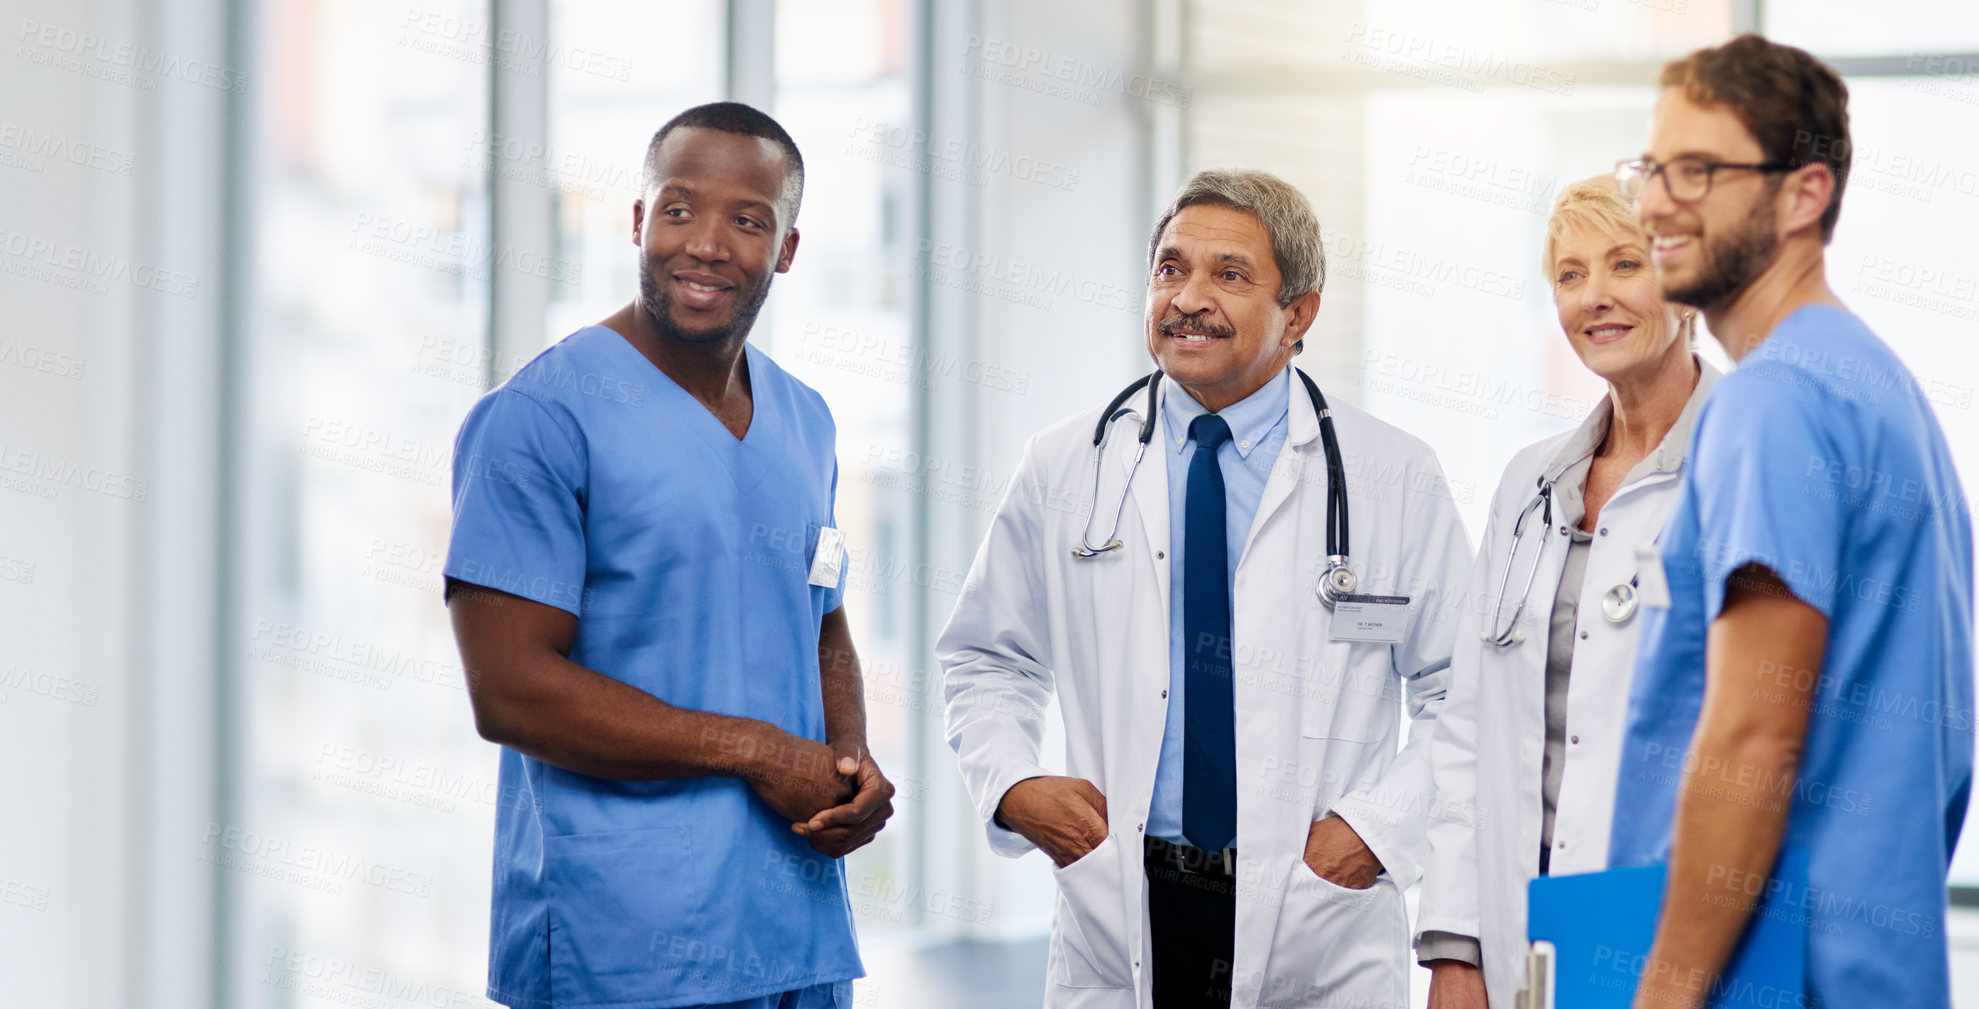 Buy stock photo Team of happy doctors having a group discussion about professional healthcare together in a hospital. Friendly young and mature medical workers standing together smiling after a successful treatment